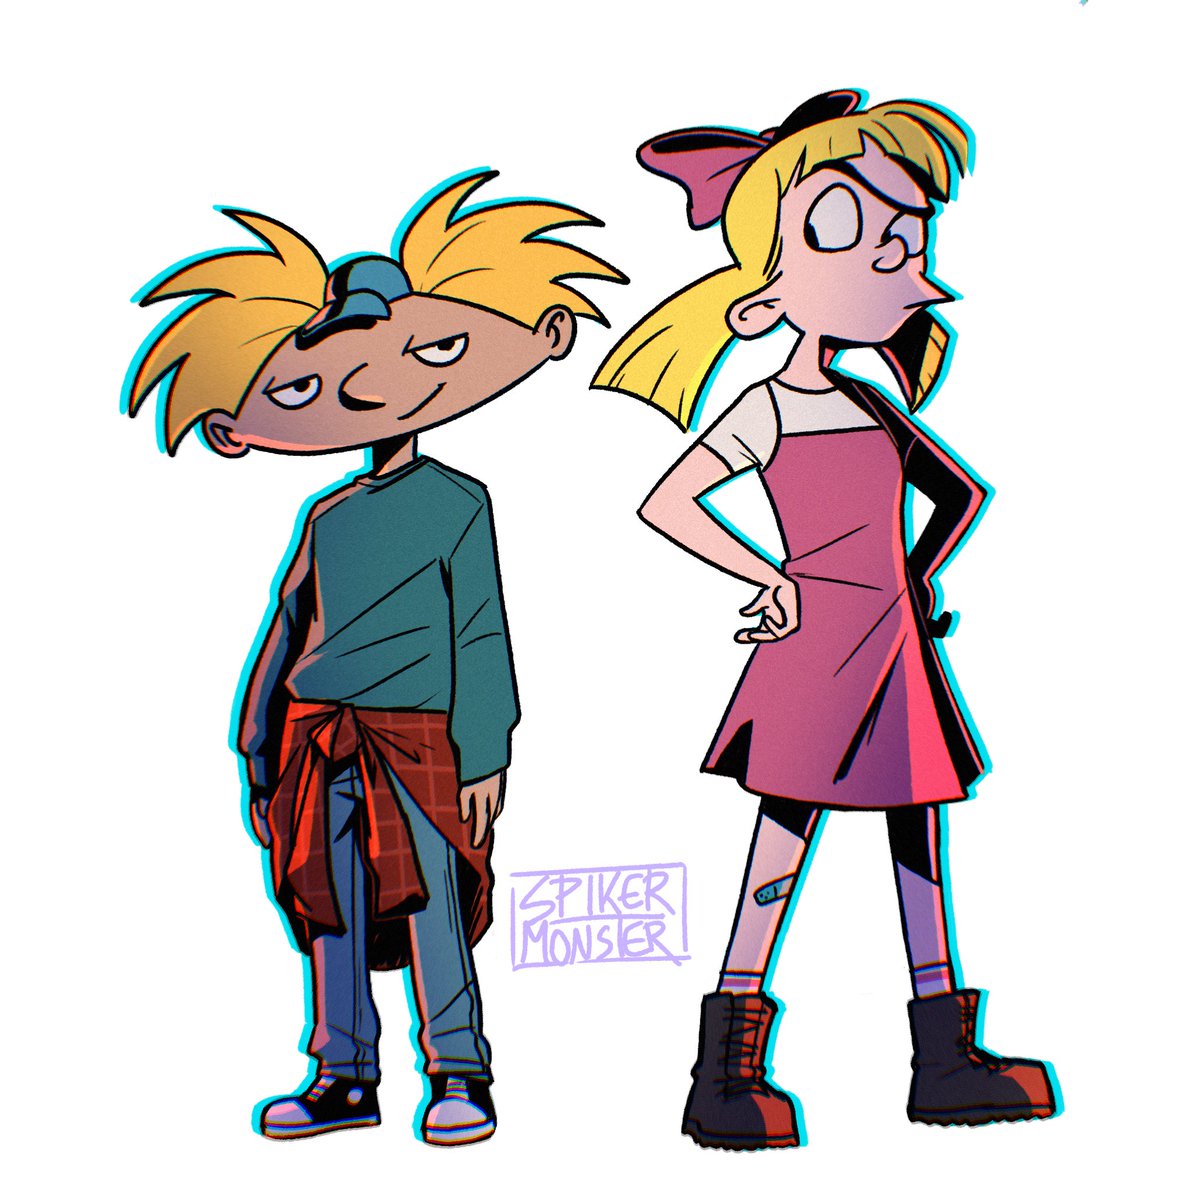 「move it 🏈head!!!!! 🗣 #heyarnold 」|Spike R. Monster 💀のイラスト